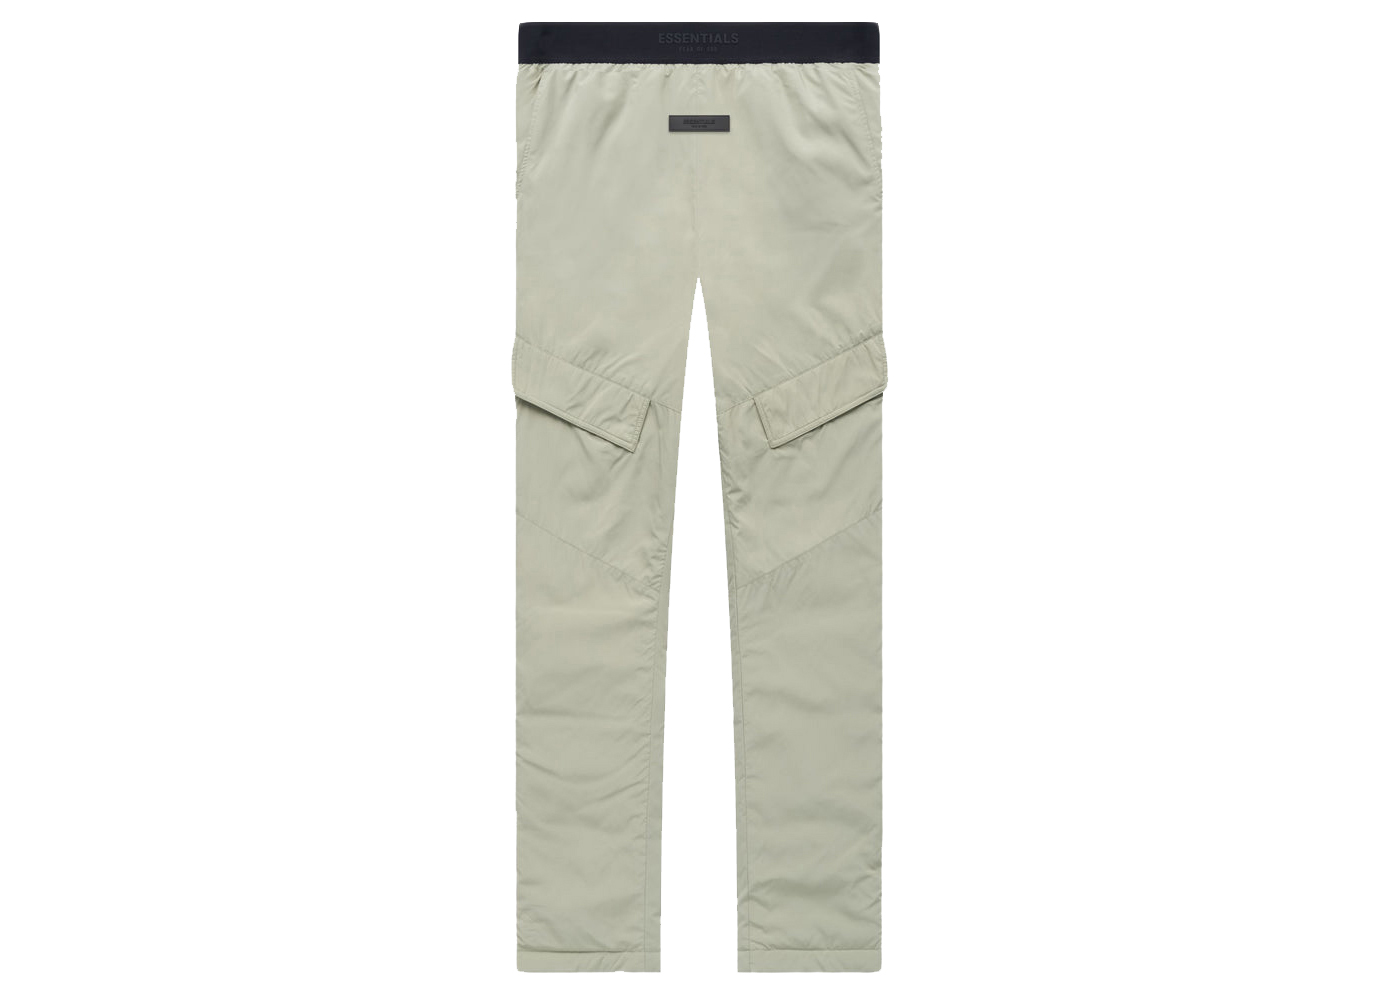 ESSENTIALS by FEAR OF GOD STORM PANTS